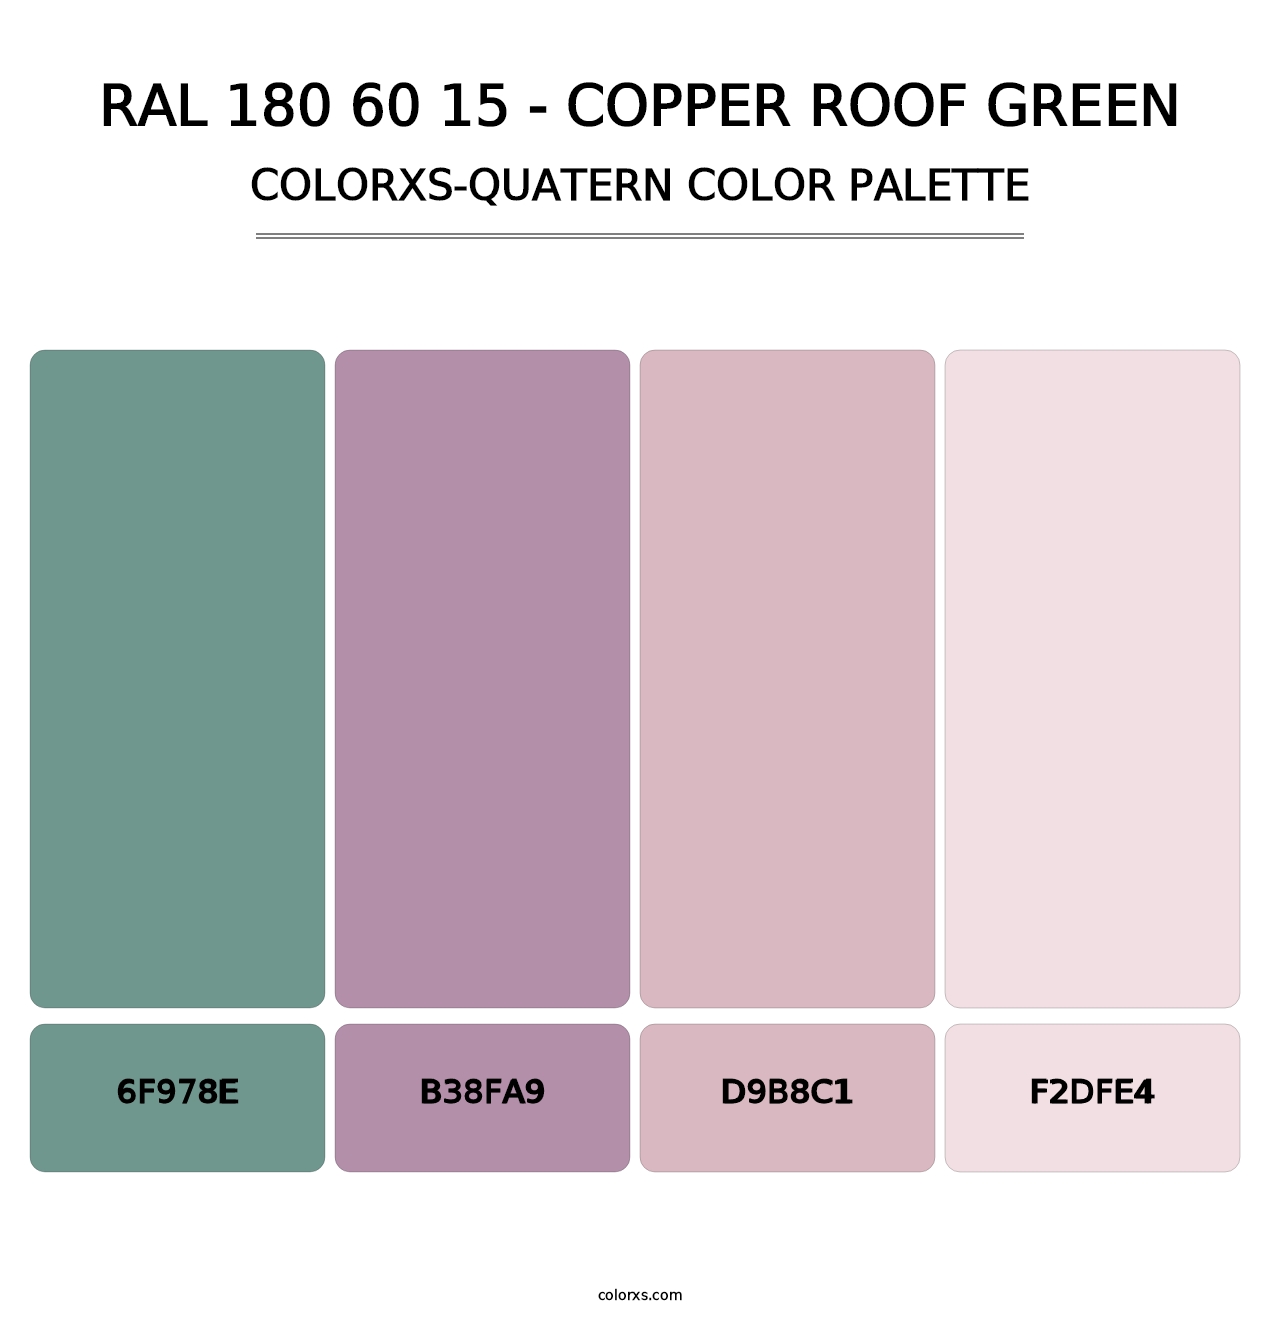 RAL 180 60 15 - Copper Roof Green - Colorxs Quatern Palette